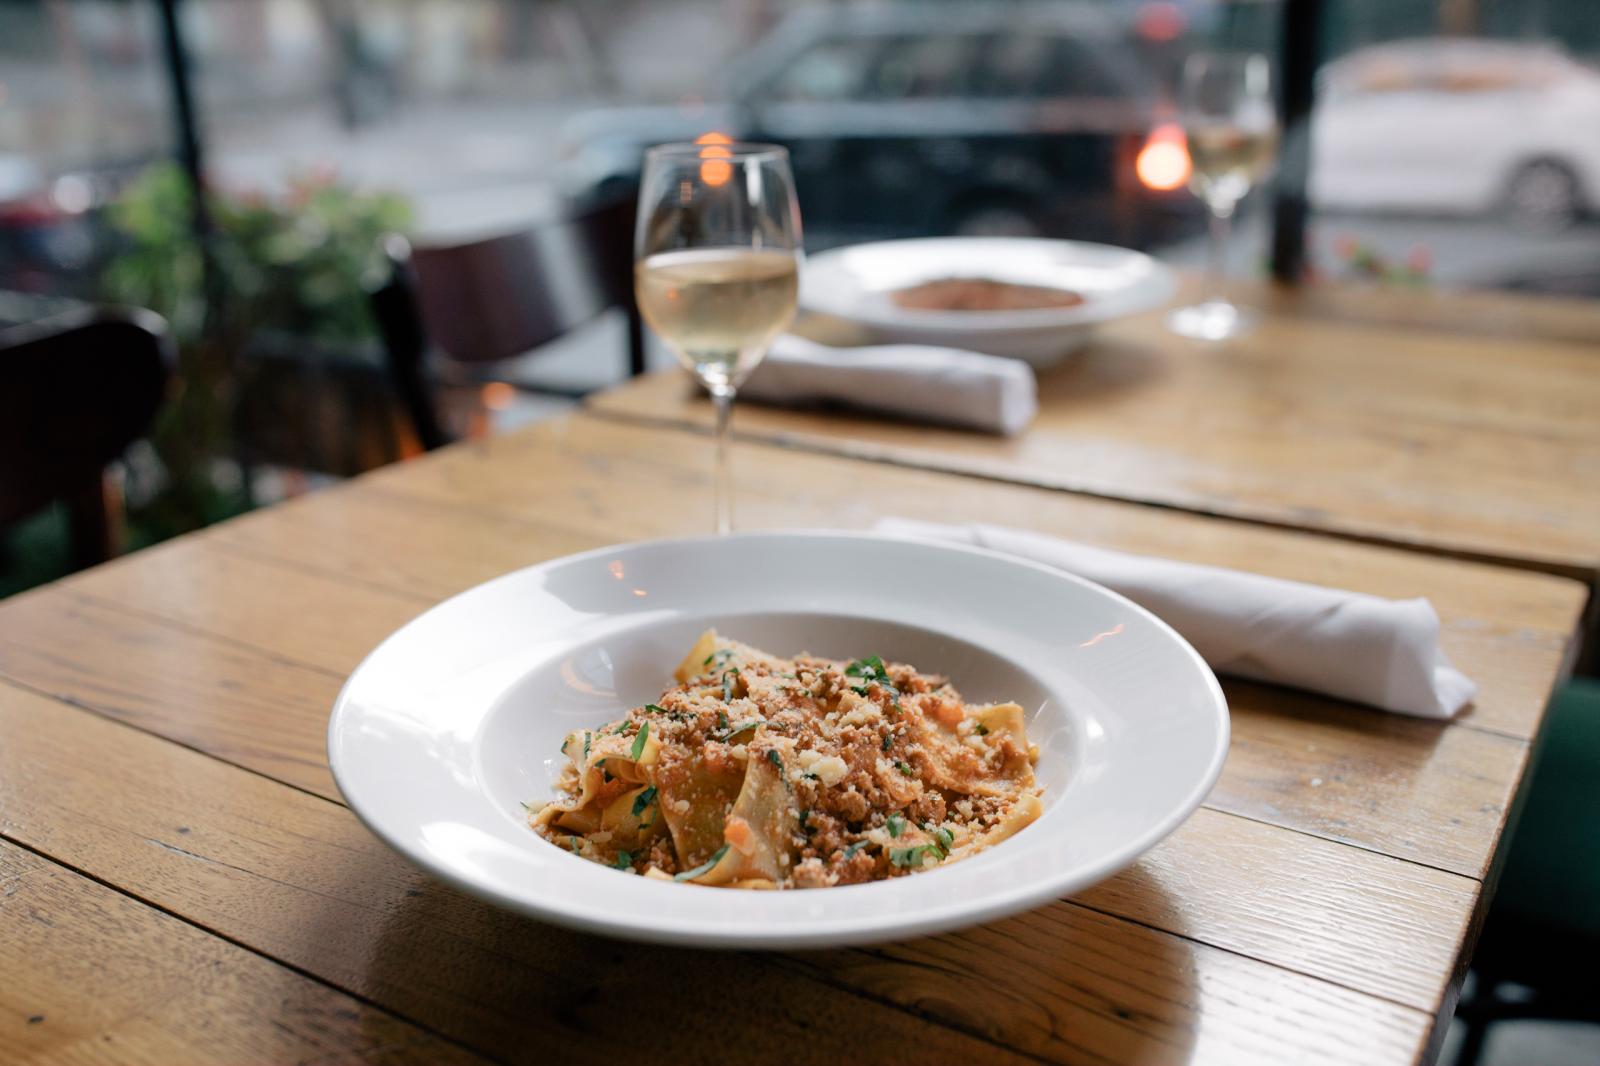 Image from FOOD - Tribeca Grill at 375 Greenwich St in the cobblestone...